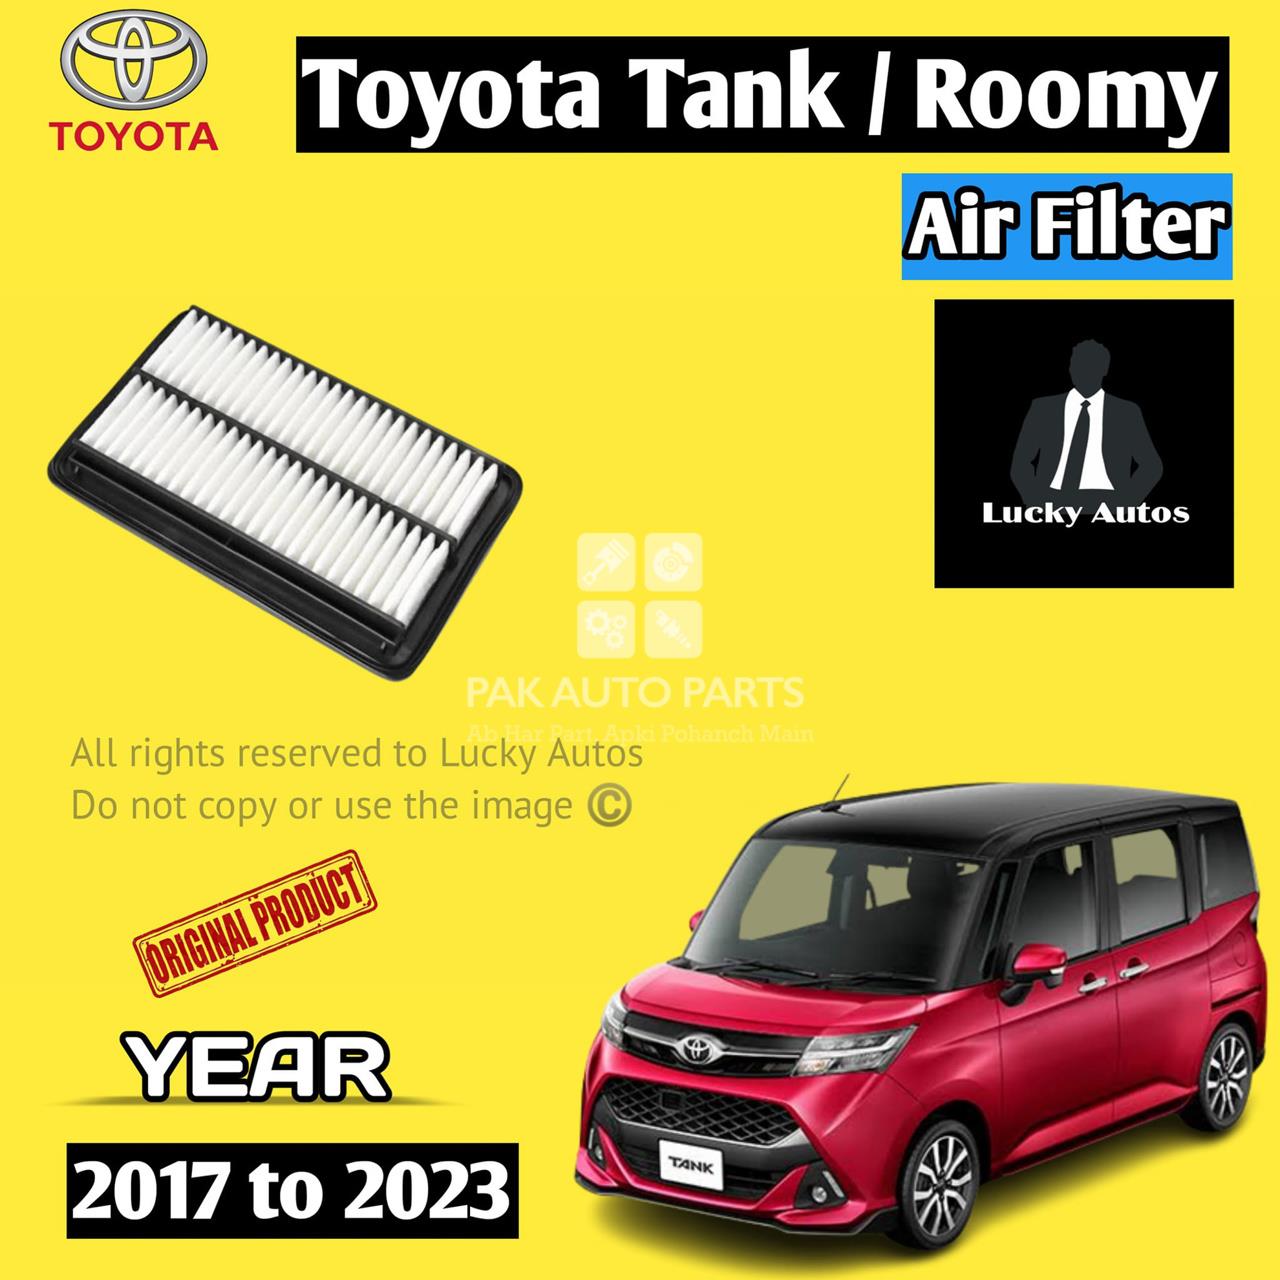 Picture of Toyota Tank / Roomy Air Filter Year 2017 to 2023